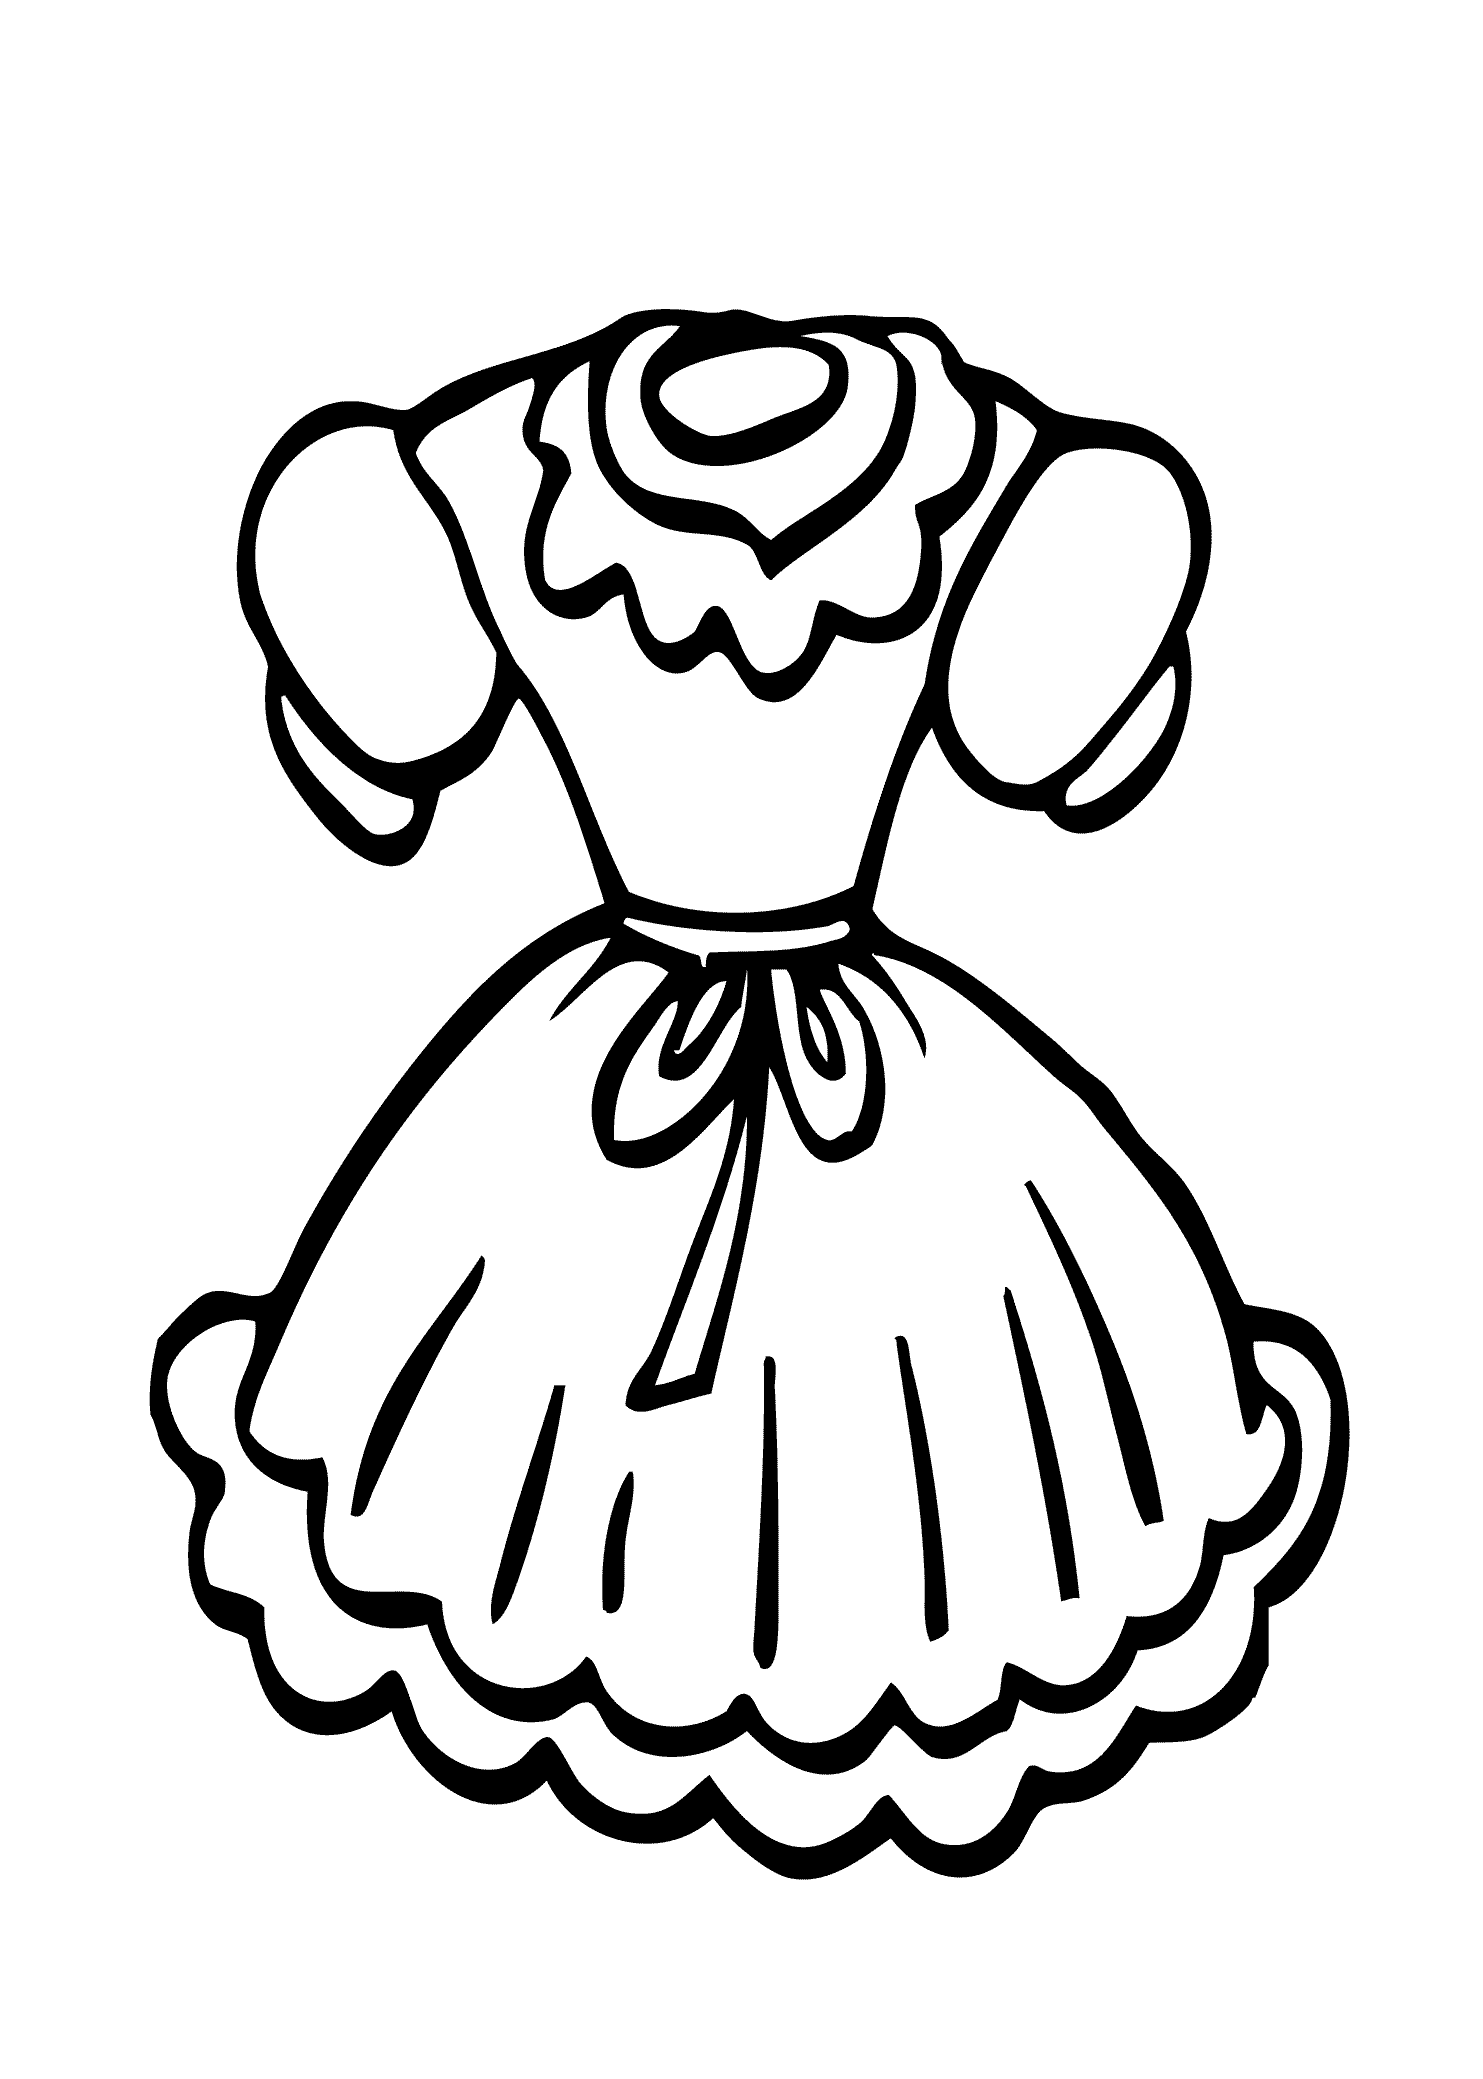 Coloring Pages For Girls | Free download on ClipArtMag